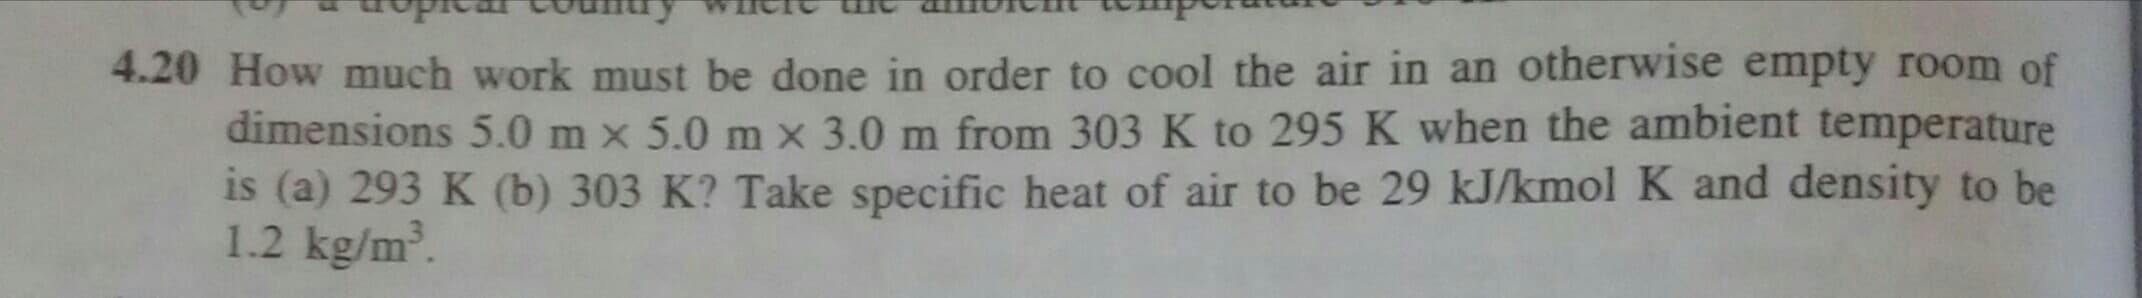 OHOW much work must be done in order to cool the air in an otherwise empty room of
dimensions 5.0 m x 5.0 m x 3.0 m from 303 K to 295 K when the ambient temperature
is (a) 293 K (b) 303 K? Take specific heat of air to be 29 kJ/kmol K and density to be
1.2 kg/m.
